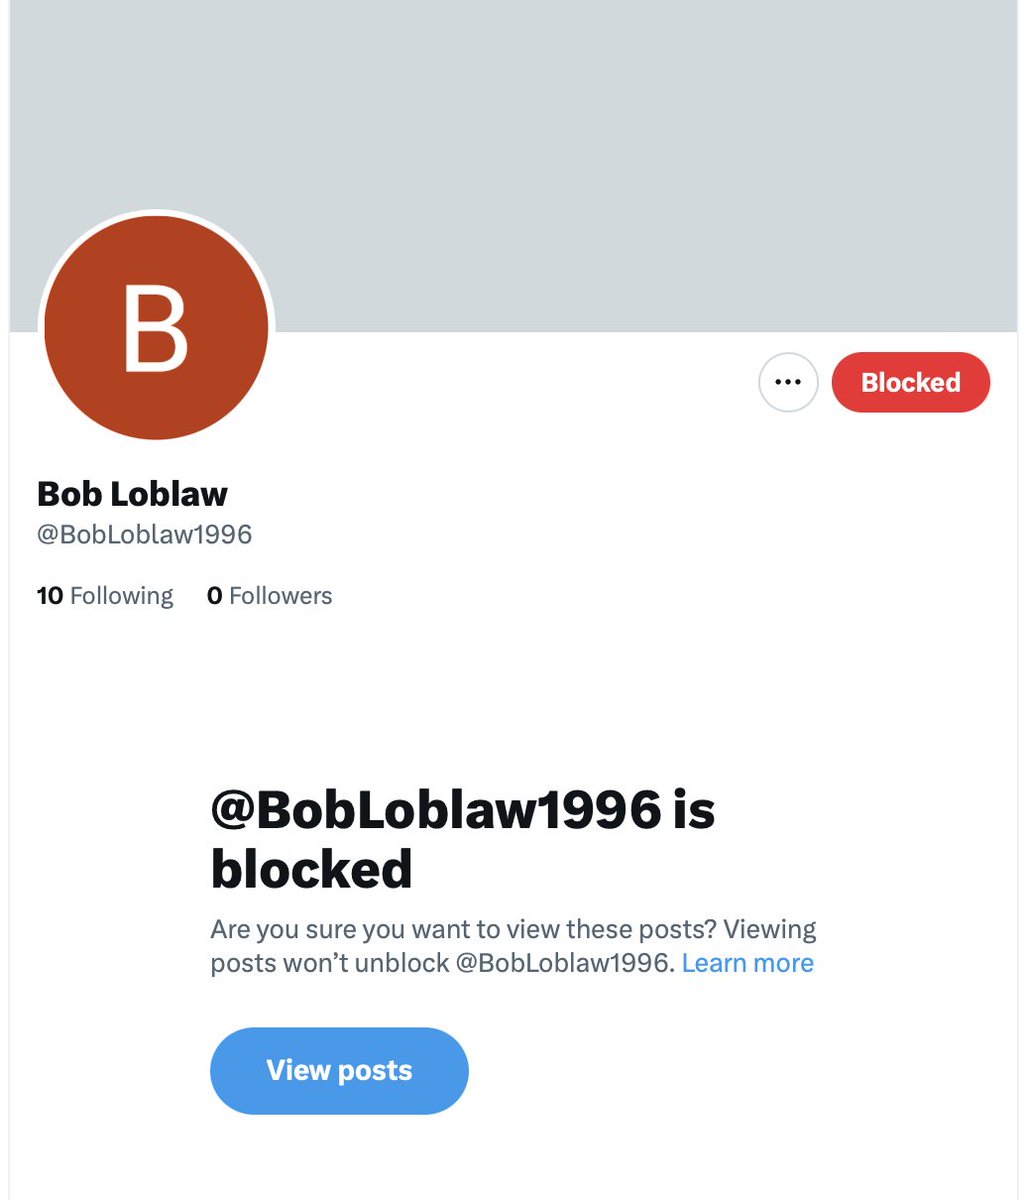 This one is a tad obsessive: @BobLoblaw1996 I've obviously upset him before by calling out his racism. He's one of those 'I'm not a racist, you Gammon' wankers. So, although no doubt he'll see it as a win, and crow a bit, I've decided that life's too short to watch shit float